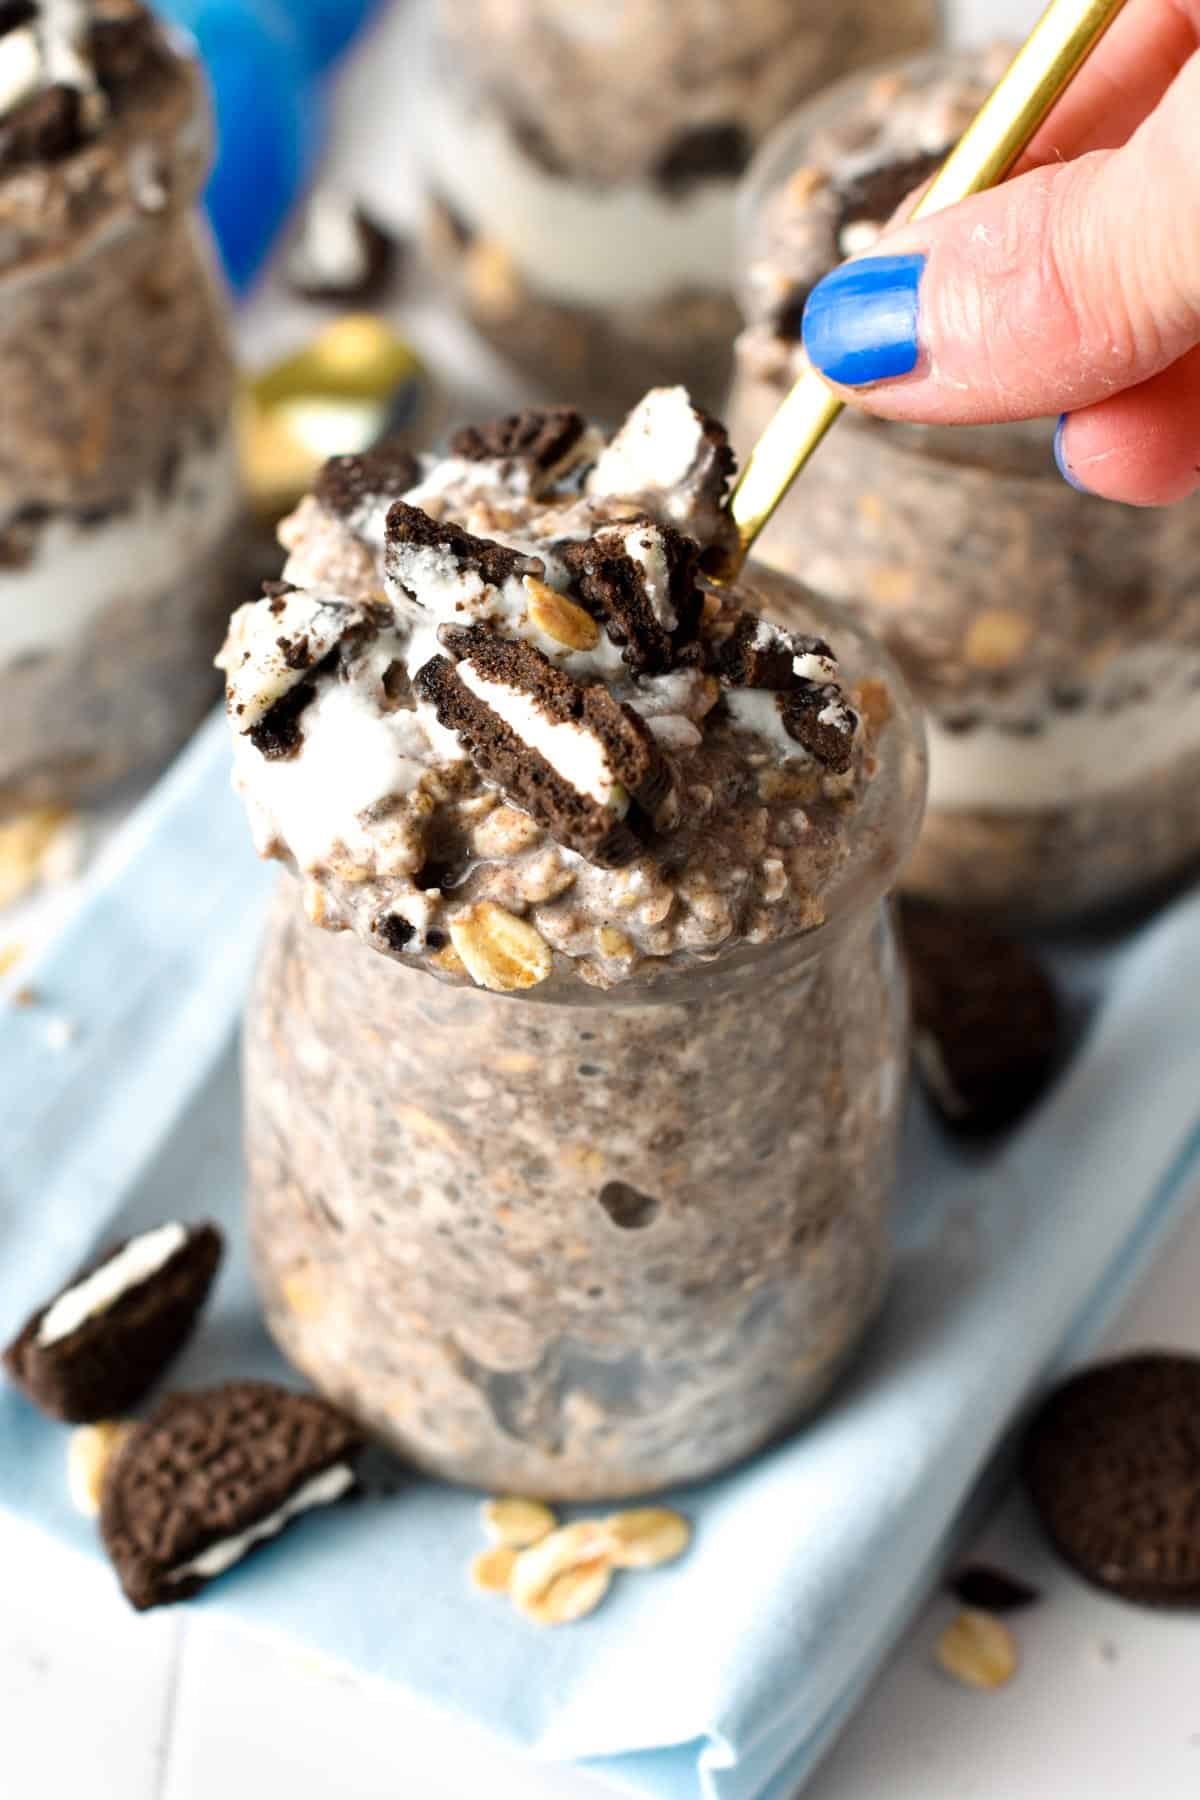 This Oreo Overnight Oats recipe is like having dessert for breakfast! It has all the healthy ingredients from the classic overnight oats recipe with a touch of Oreo cookies, just for fun and flavor.This Oreo Overnight Oats recipe is like having dessert for breakfast! It has all the healthy ingredients from the classic overnight oats recipe with a touch of Oreo cookies, just for fun and flavor.